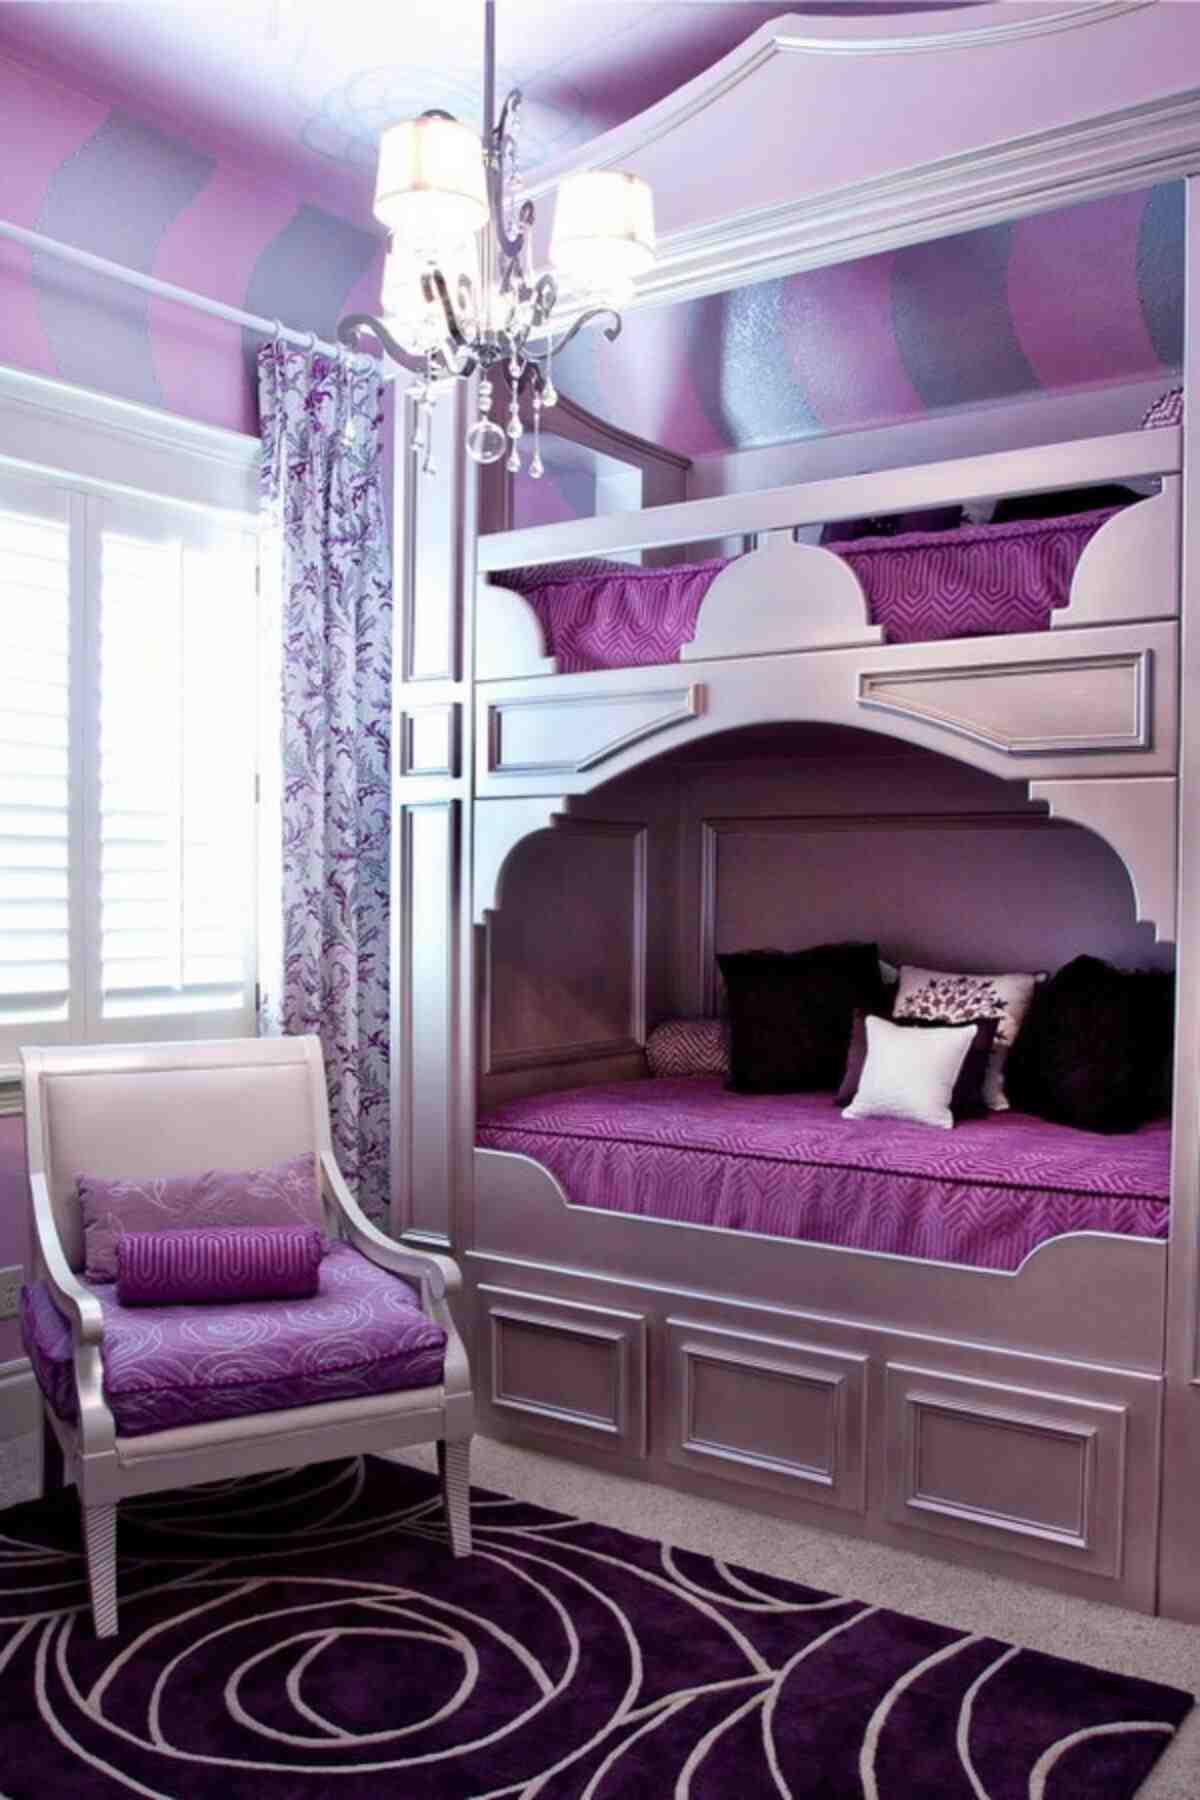 Cool Bunk Beds The Best Kids Room, Cool Girl Bunk Beds